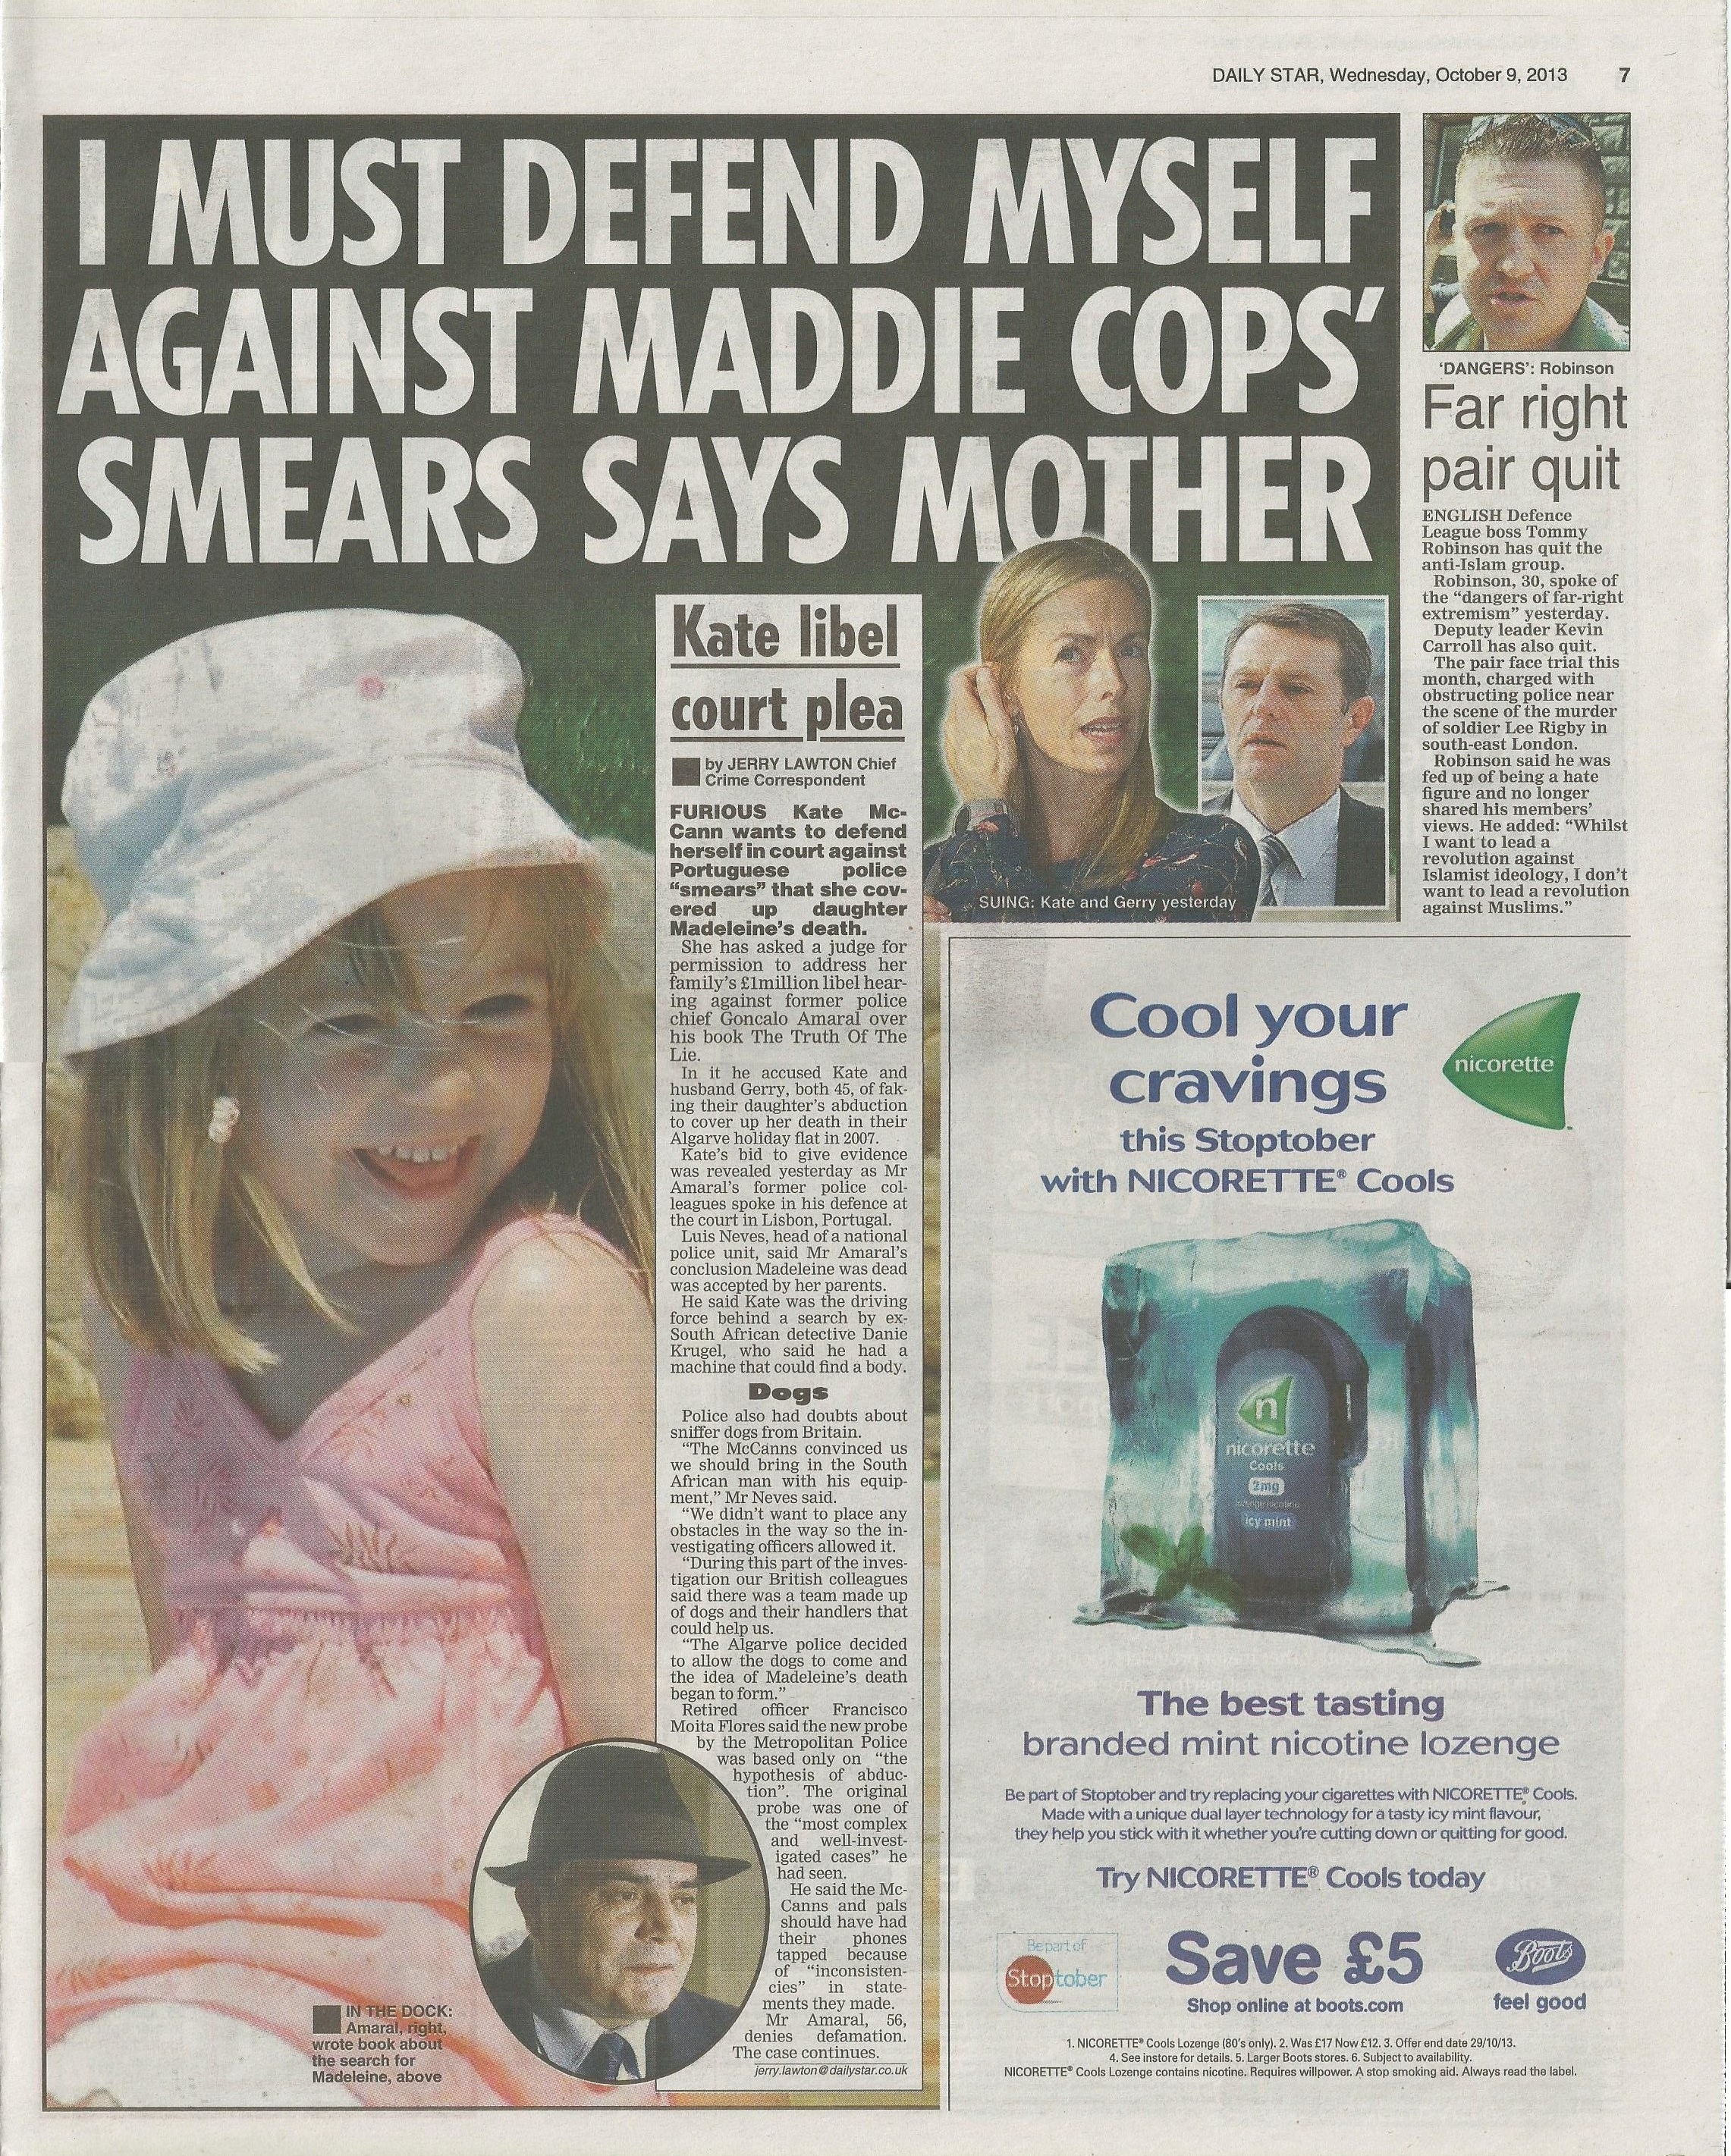 Daily Star, paper edition: 'I must defend myself against Maddie cops' smears says mother', 09 October 2013